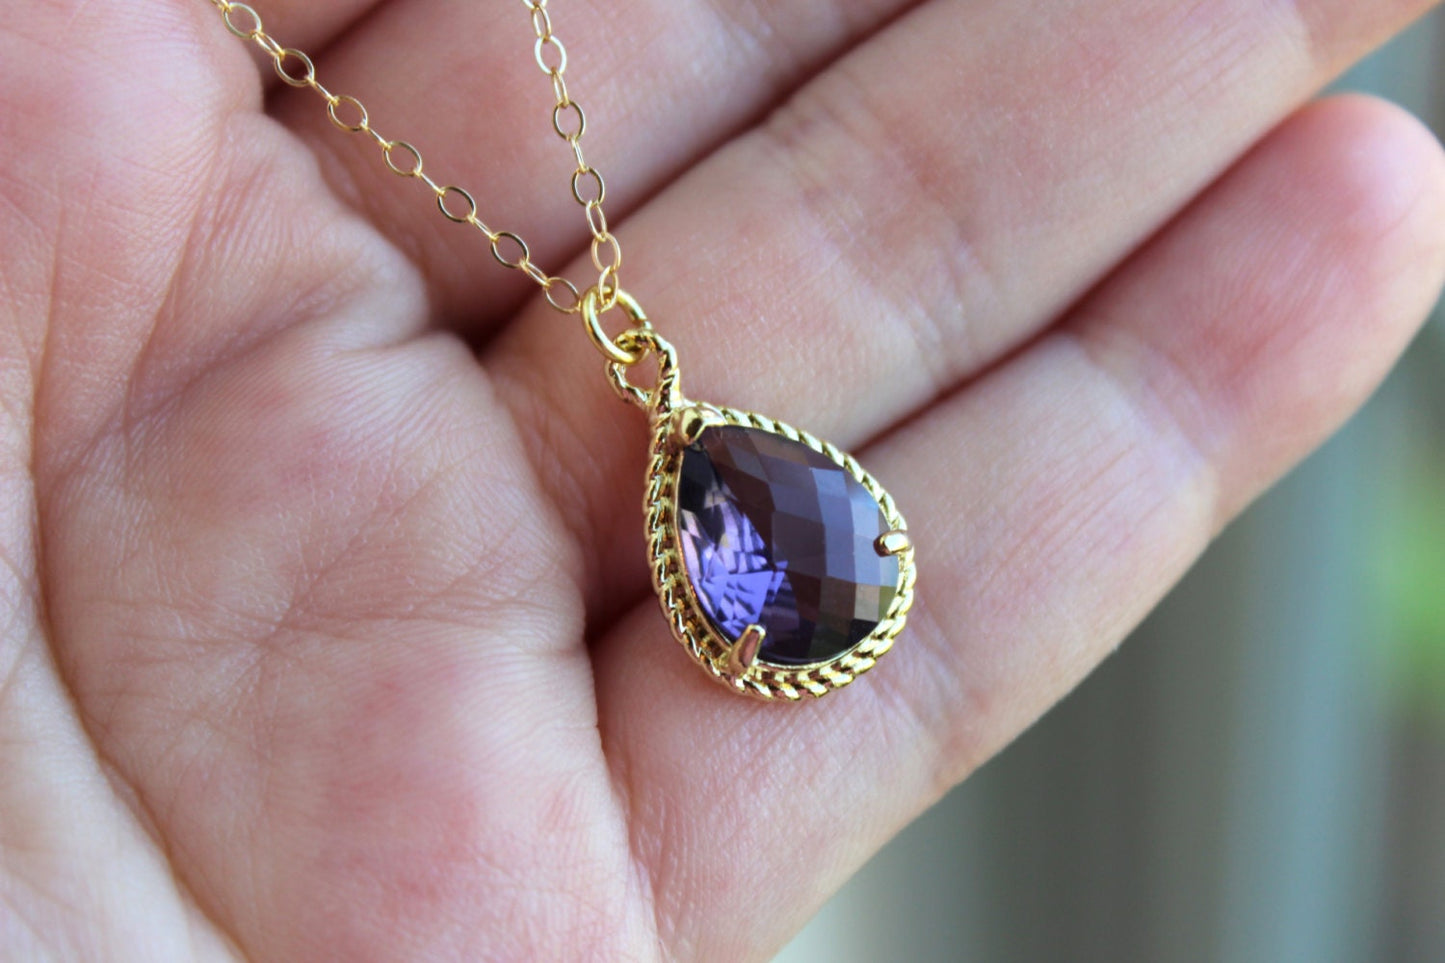 Amethyst Necklace Gold Purple Teardrop - 14k Gold Filled Chain - Bridesmaid Jewelry - Wedding Jewelry - Bridesmaid Necklace - Tanzanite